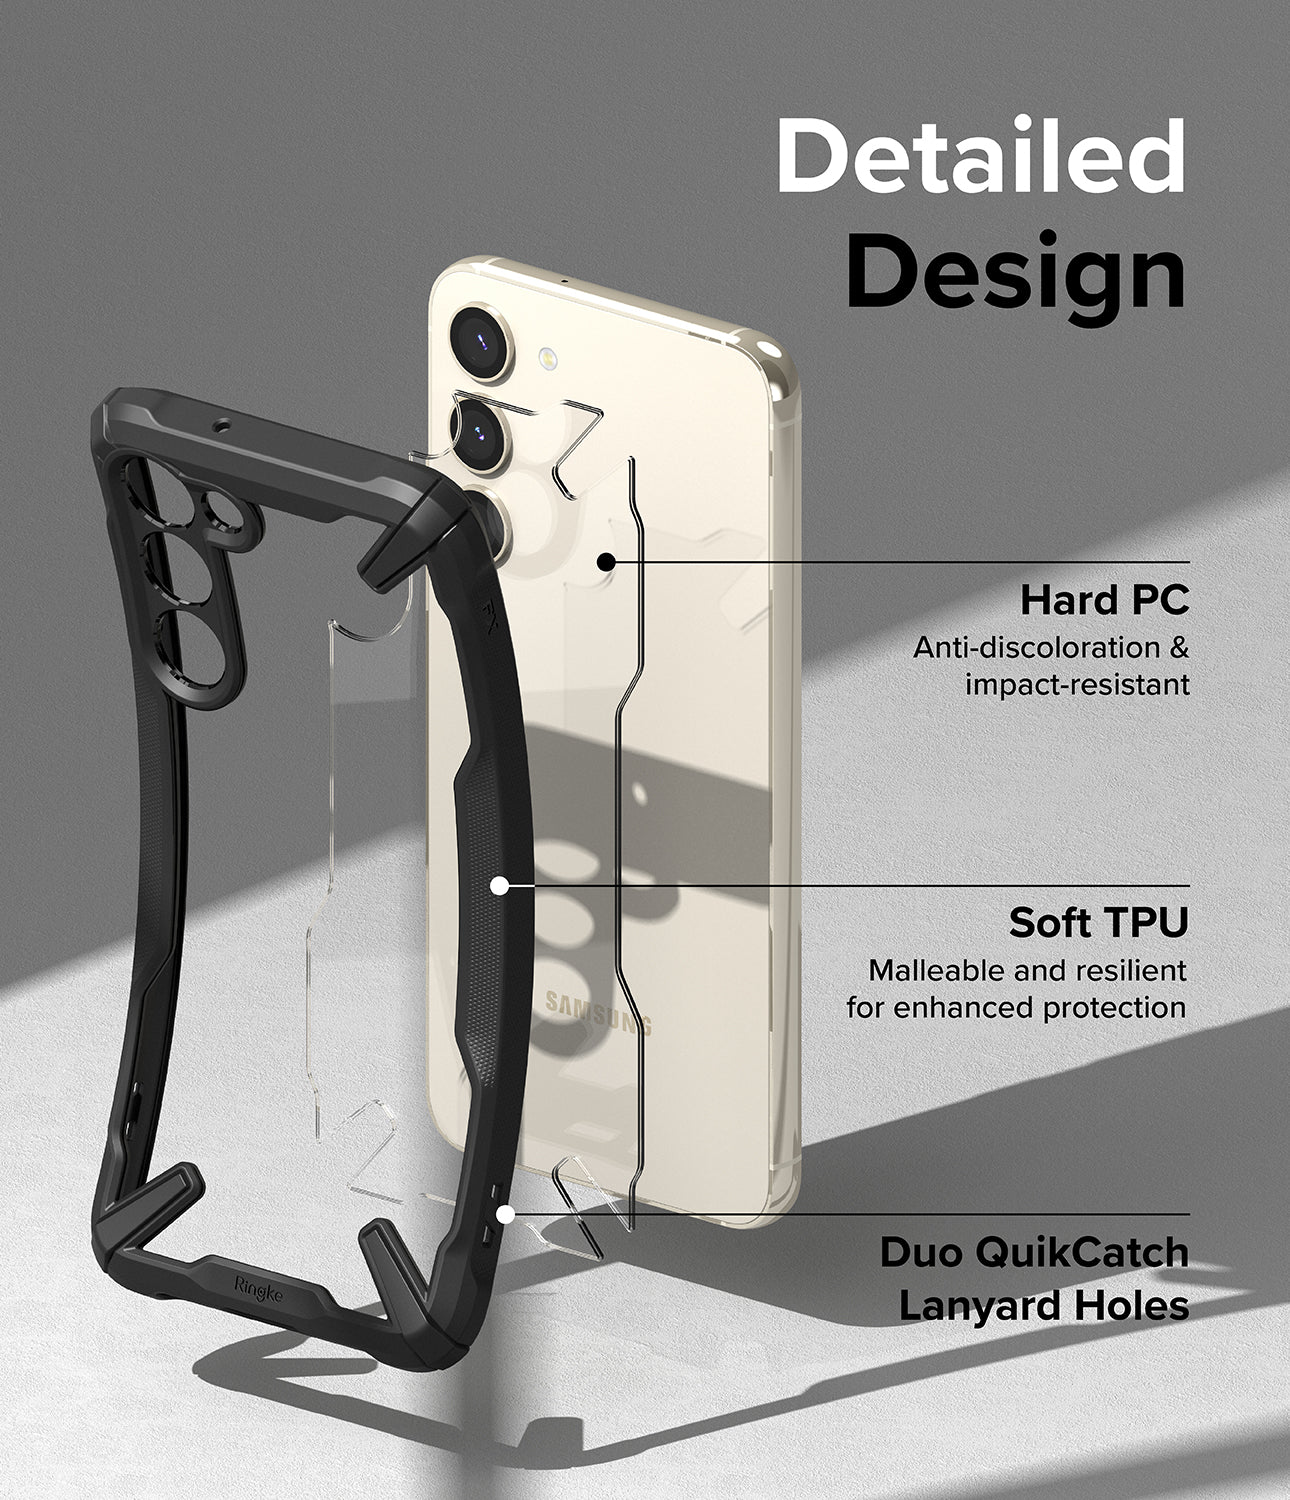 Galaxy S23 Plus Case | Fusion-X - Black - Detailed Design. Anti-discoloration and impact-resistant with Hard PC. Malleable and resilient for enhanced protection with Soft TPU. Duo QuikCatch Lanyard Holes.